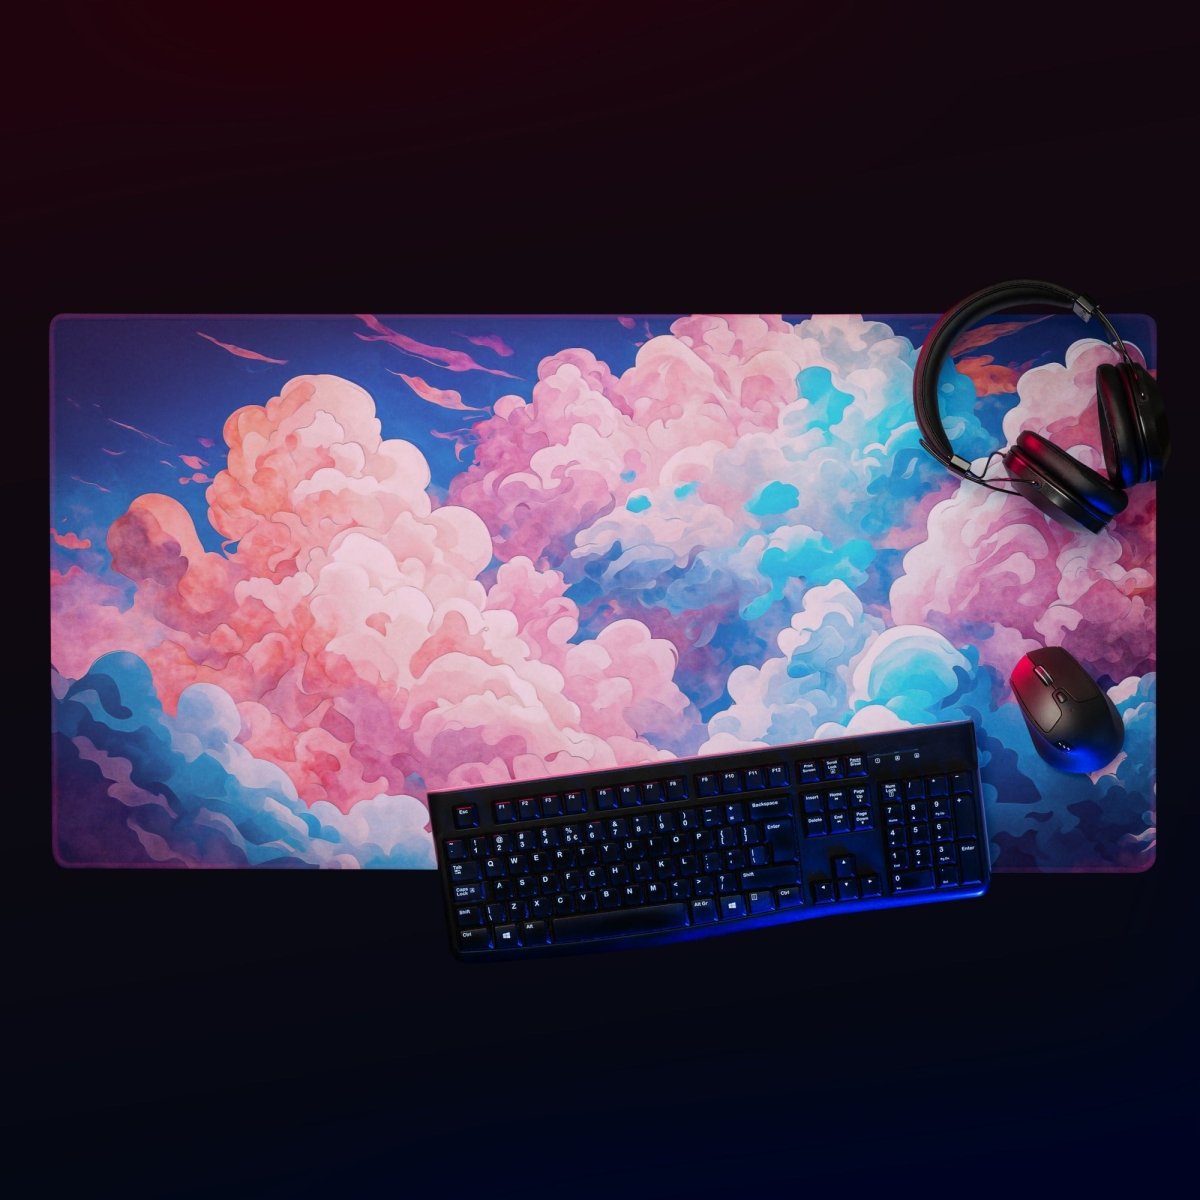 Bright clouds escape - Gaming mouse pad - Ever colorful